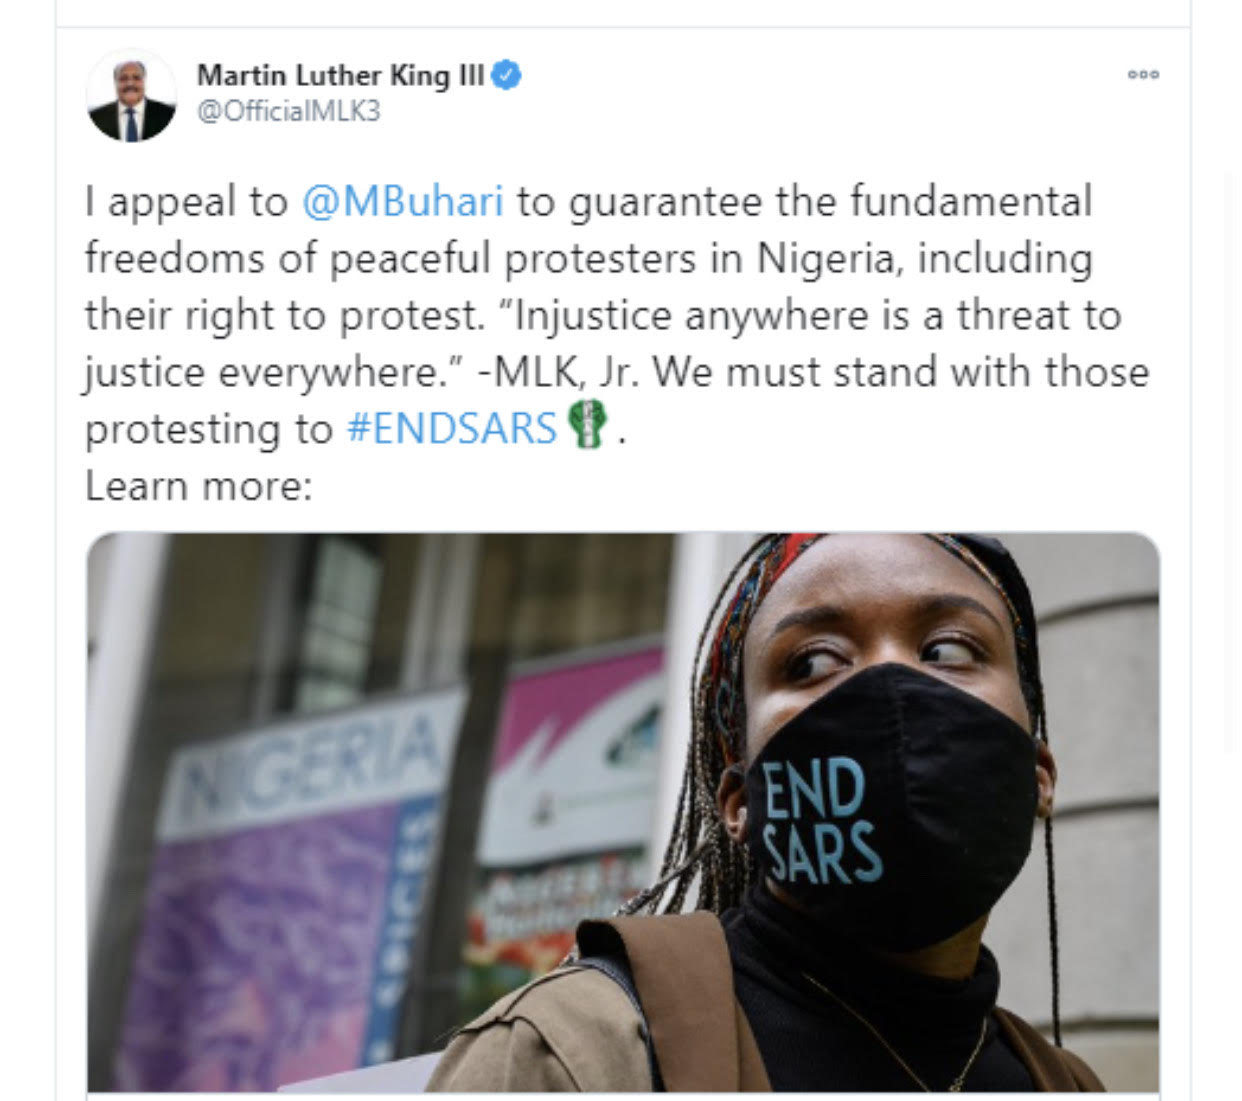 Nigeria news : #EndSARS : Injustice anywhere is a threat to justice everywhere – Martin Luther King III